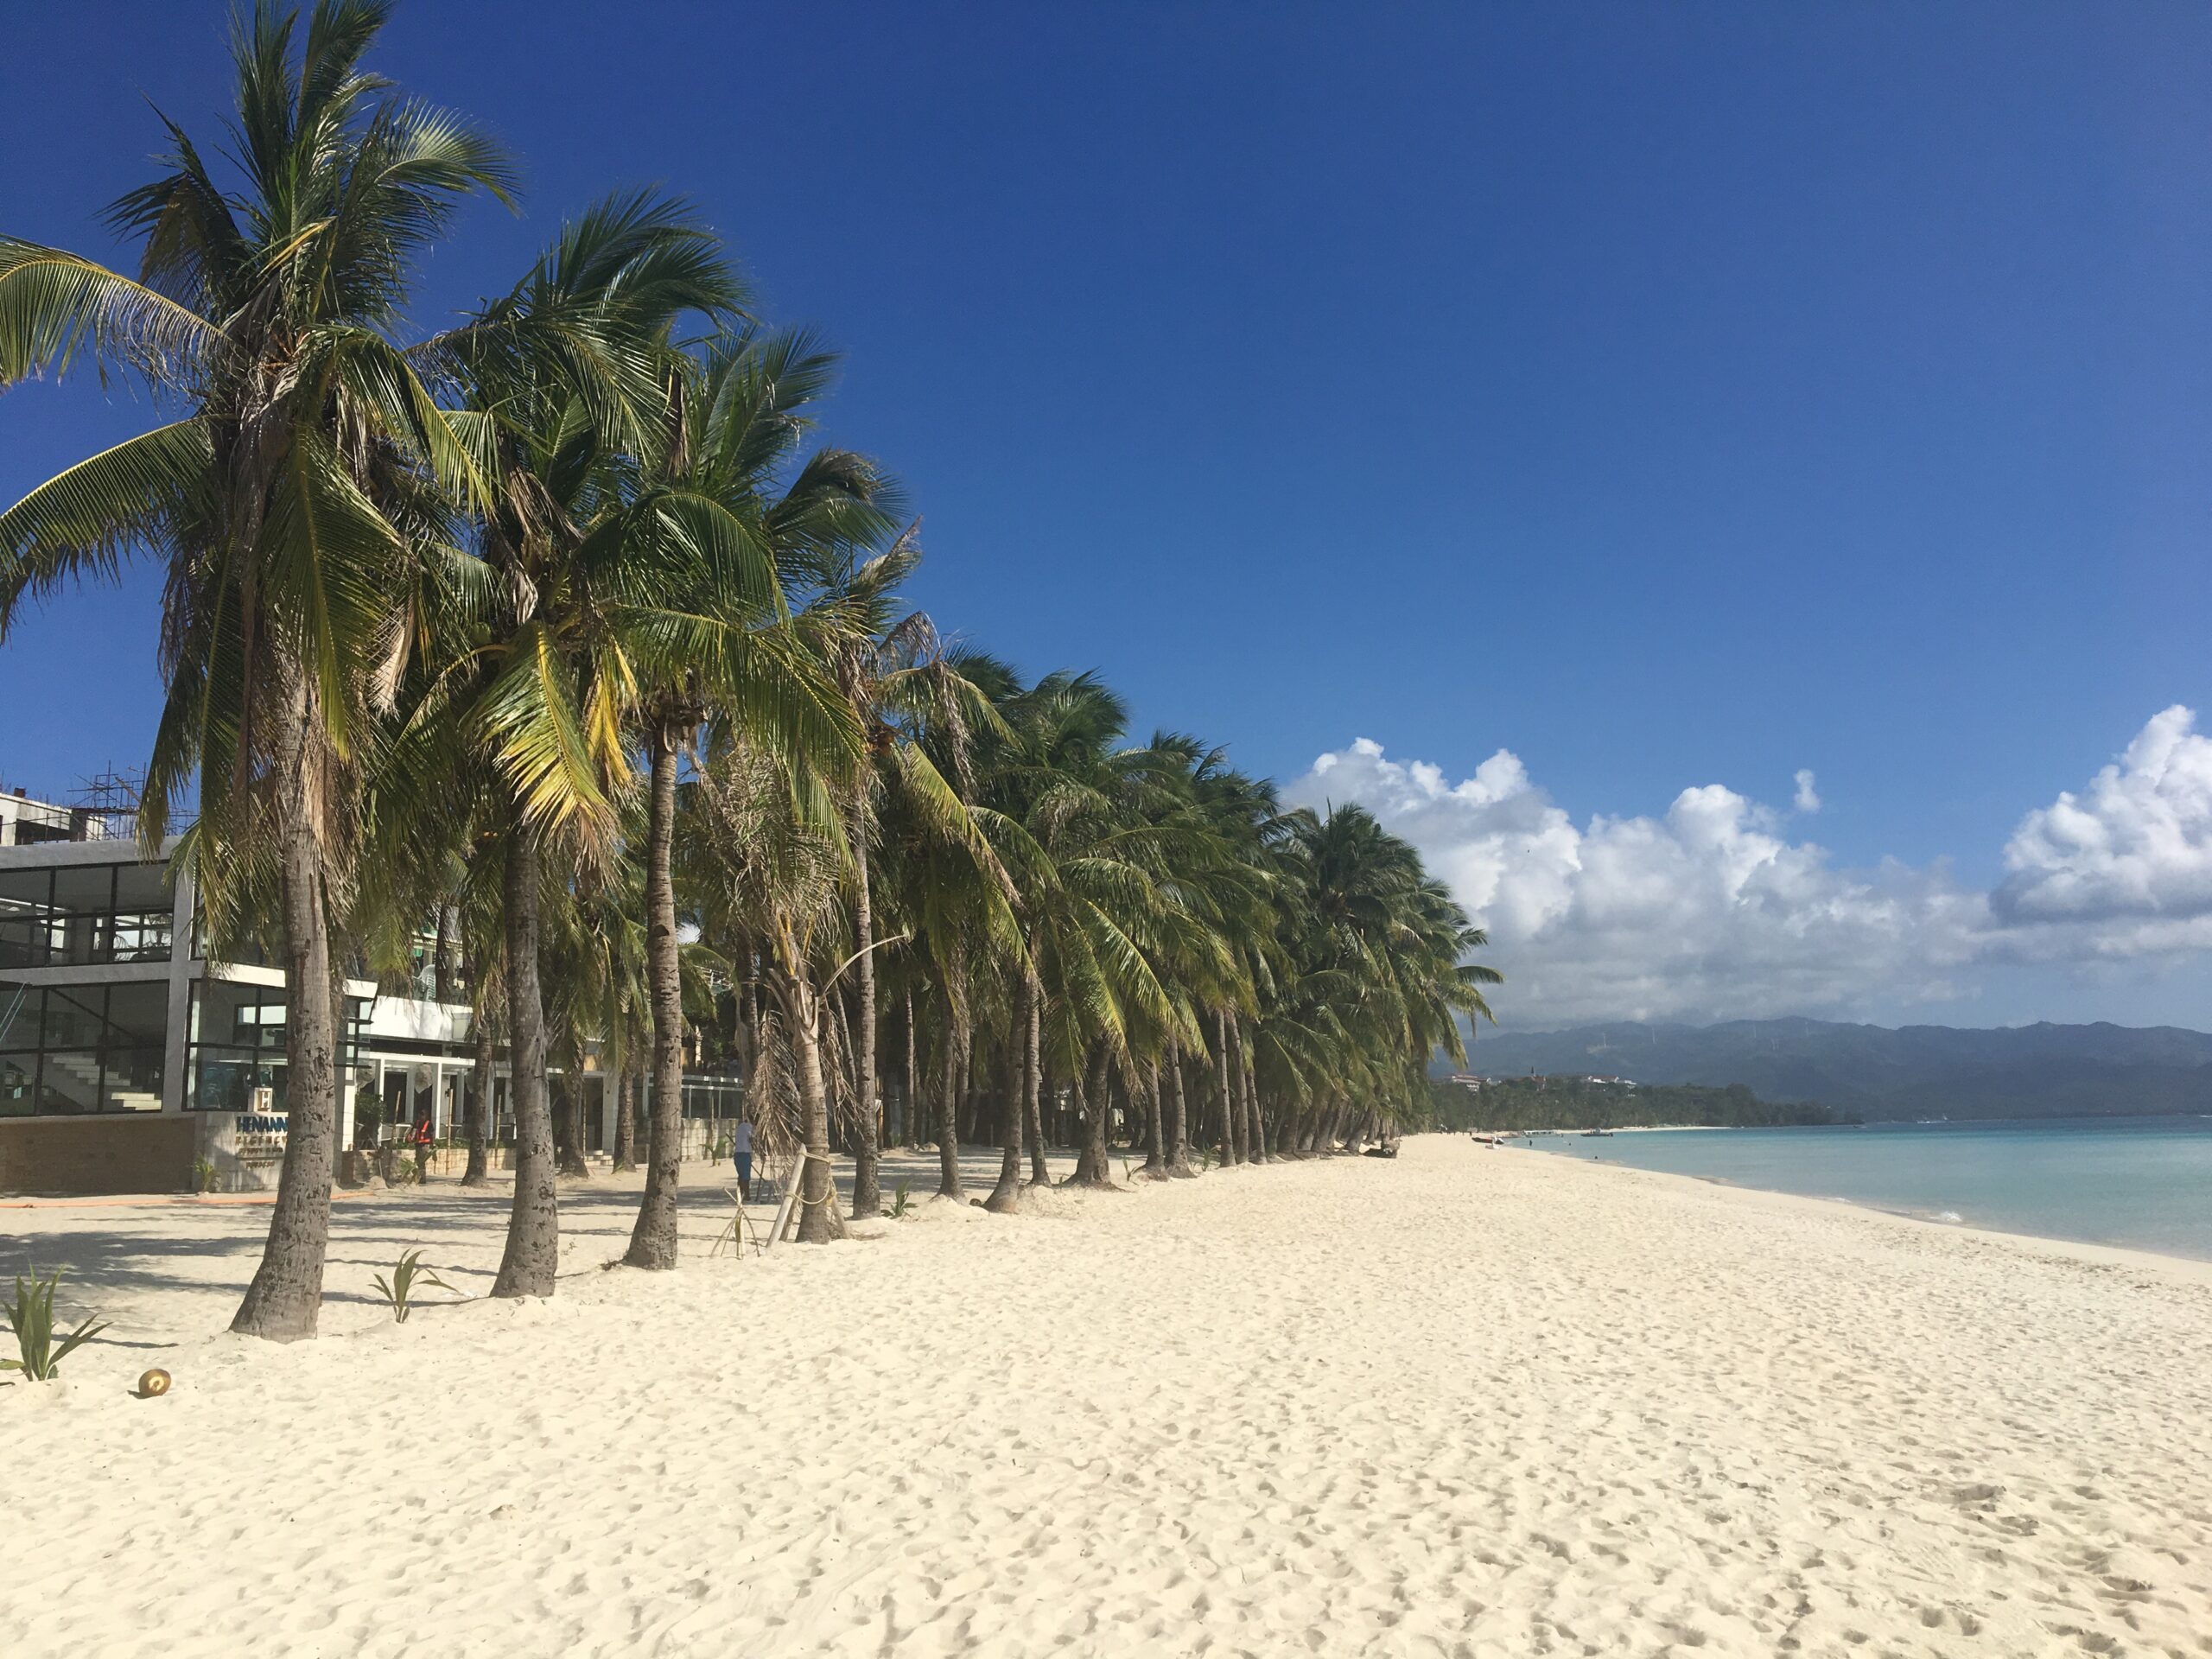 Mayor-elect Cawaling calls for unity in Boracay